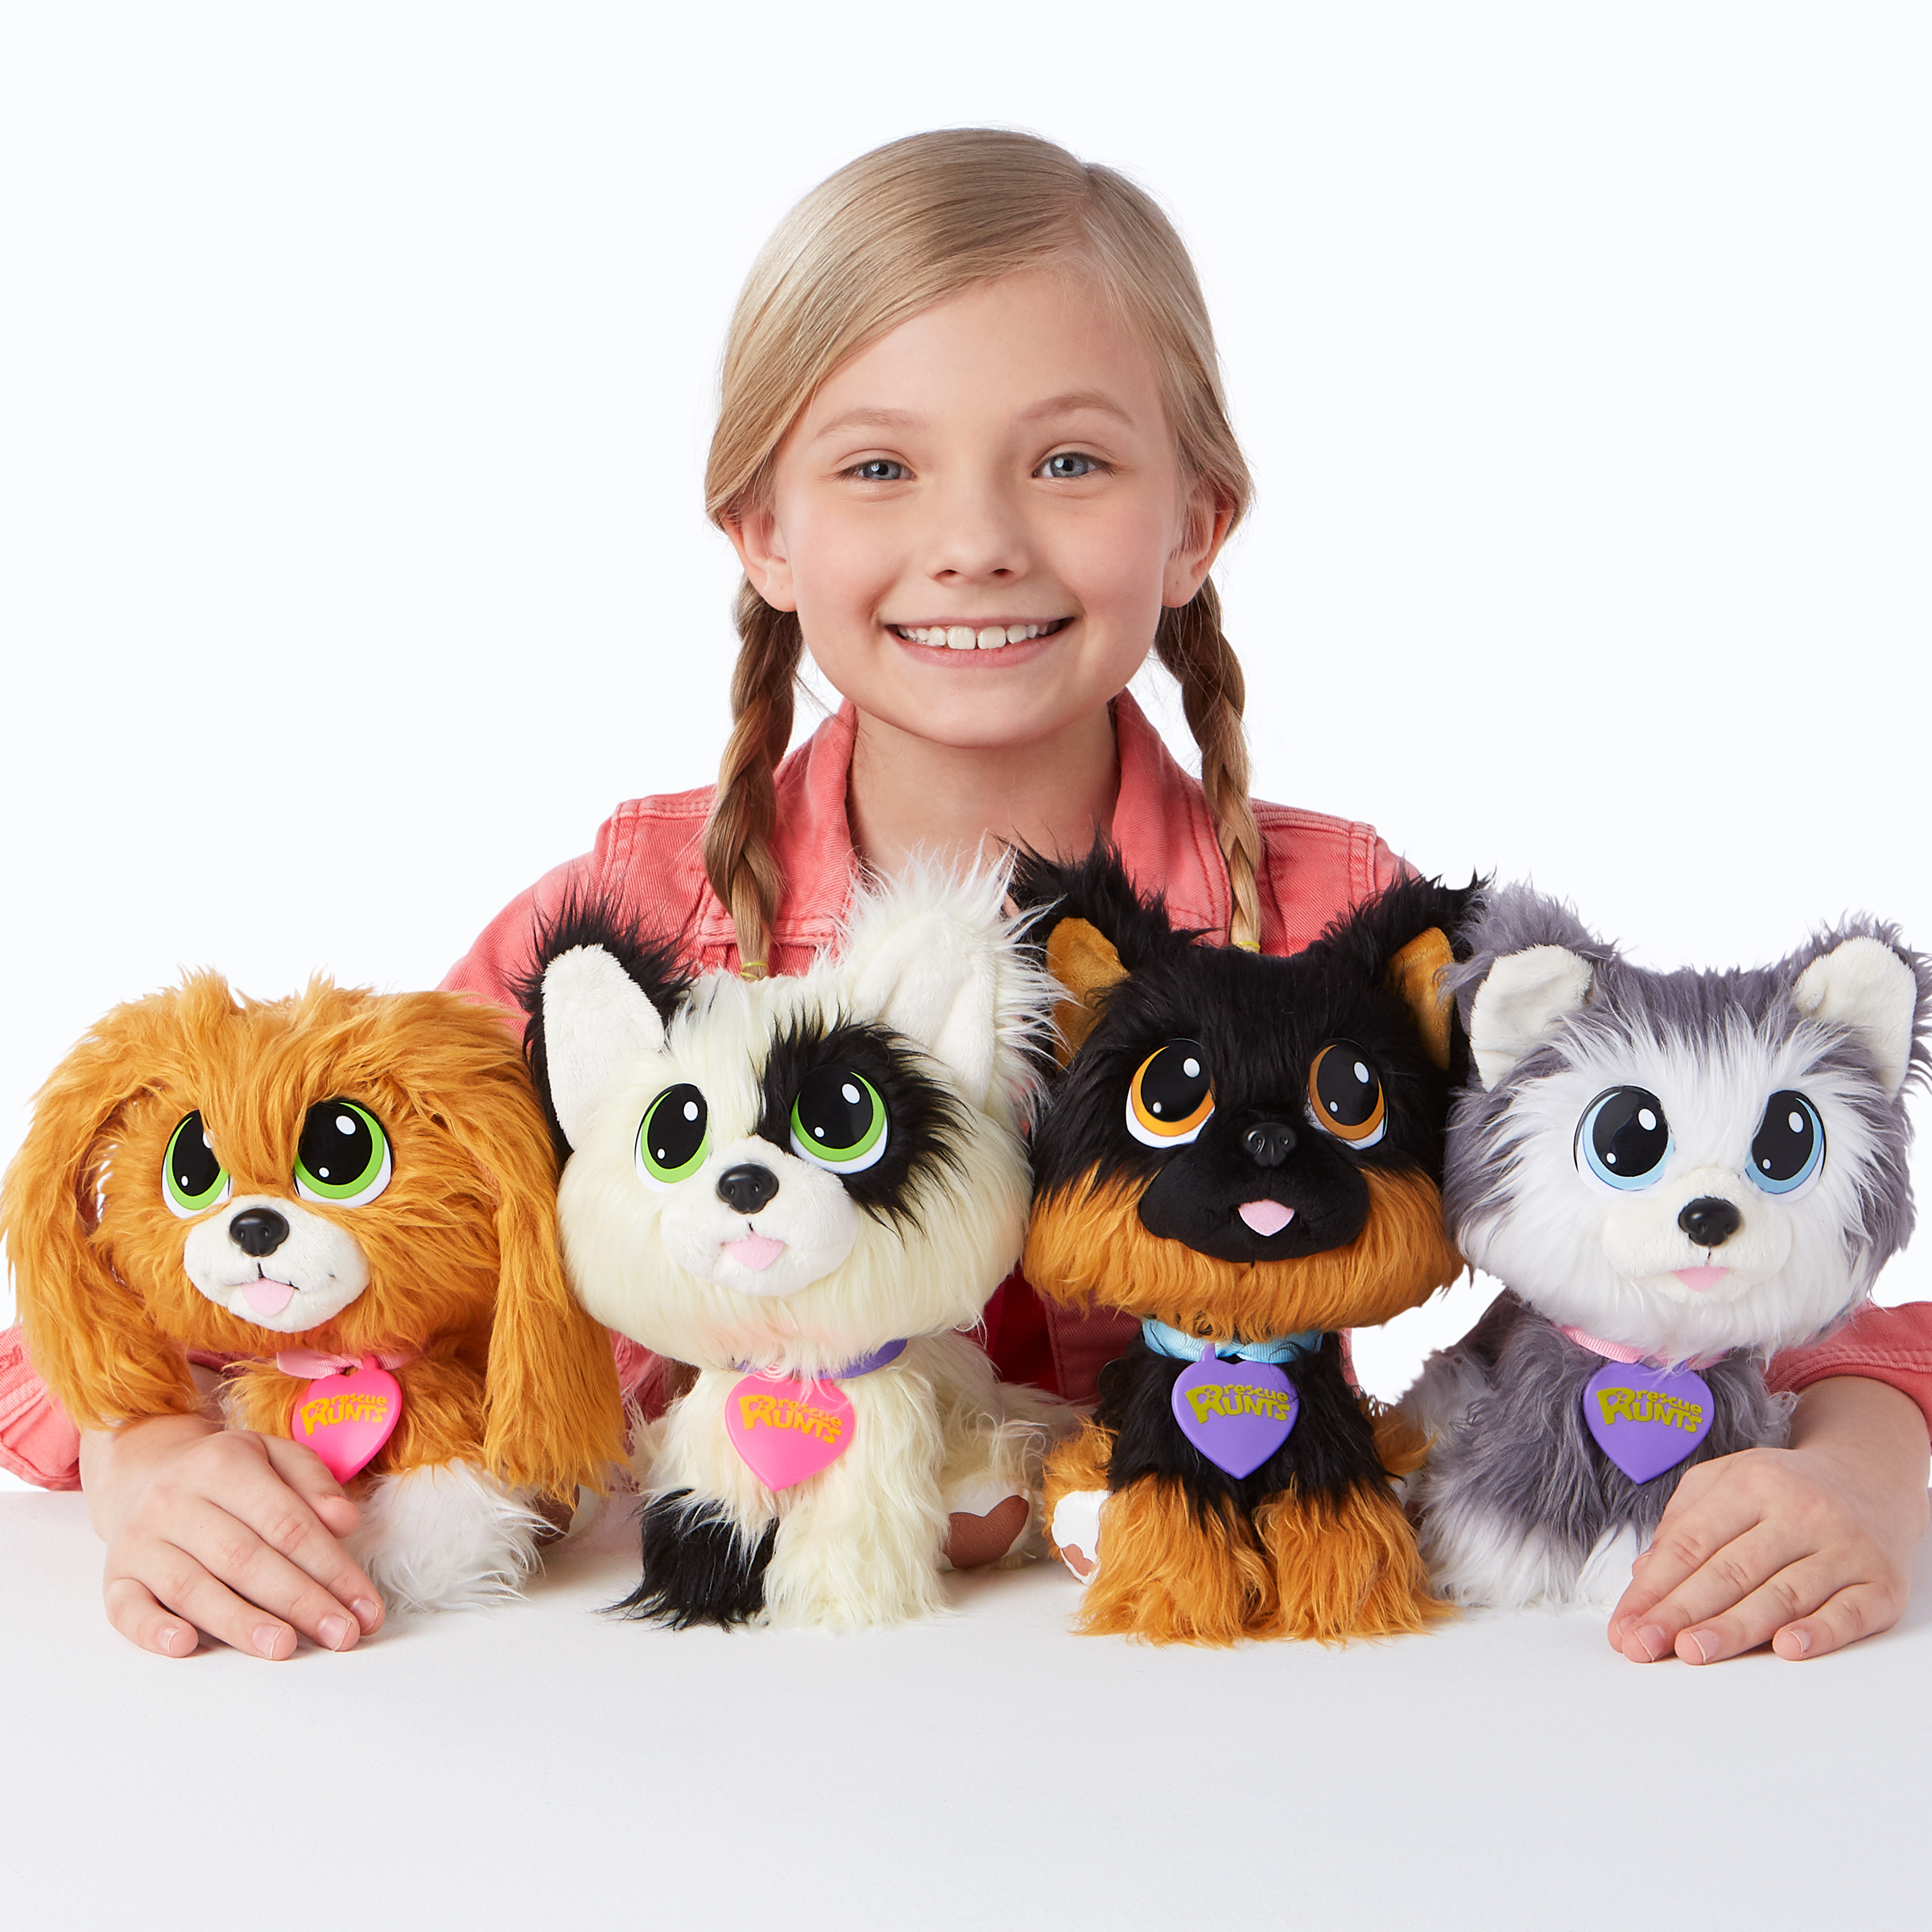 Rescue runts shepherd rescue dog plush by kd kids - image 8 of 8